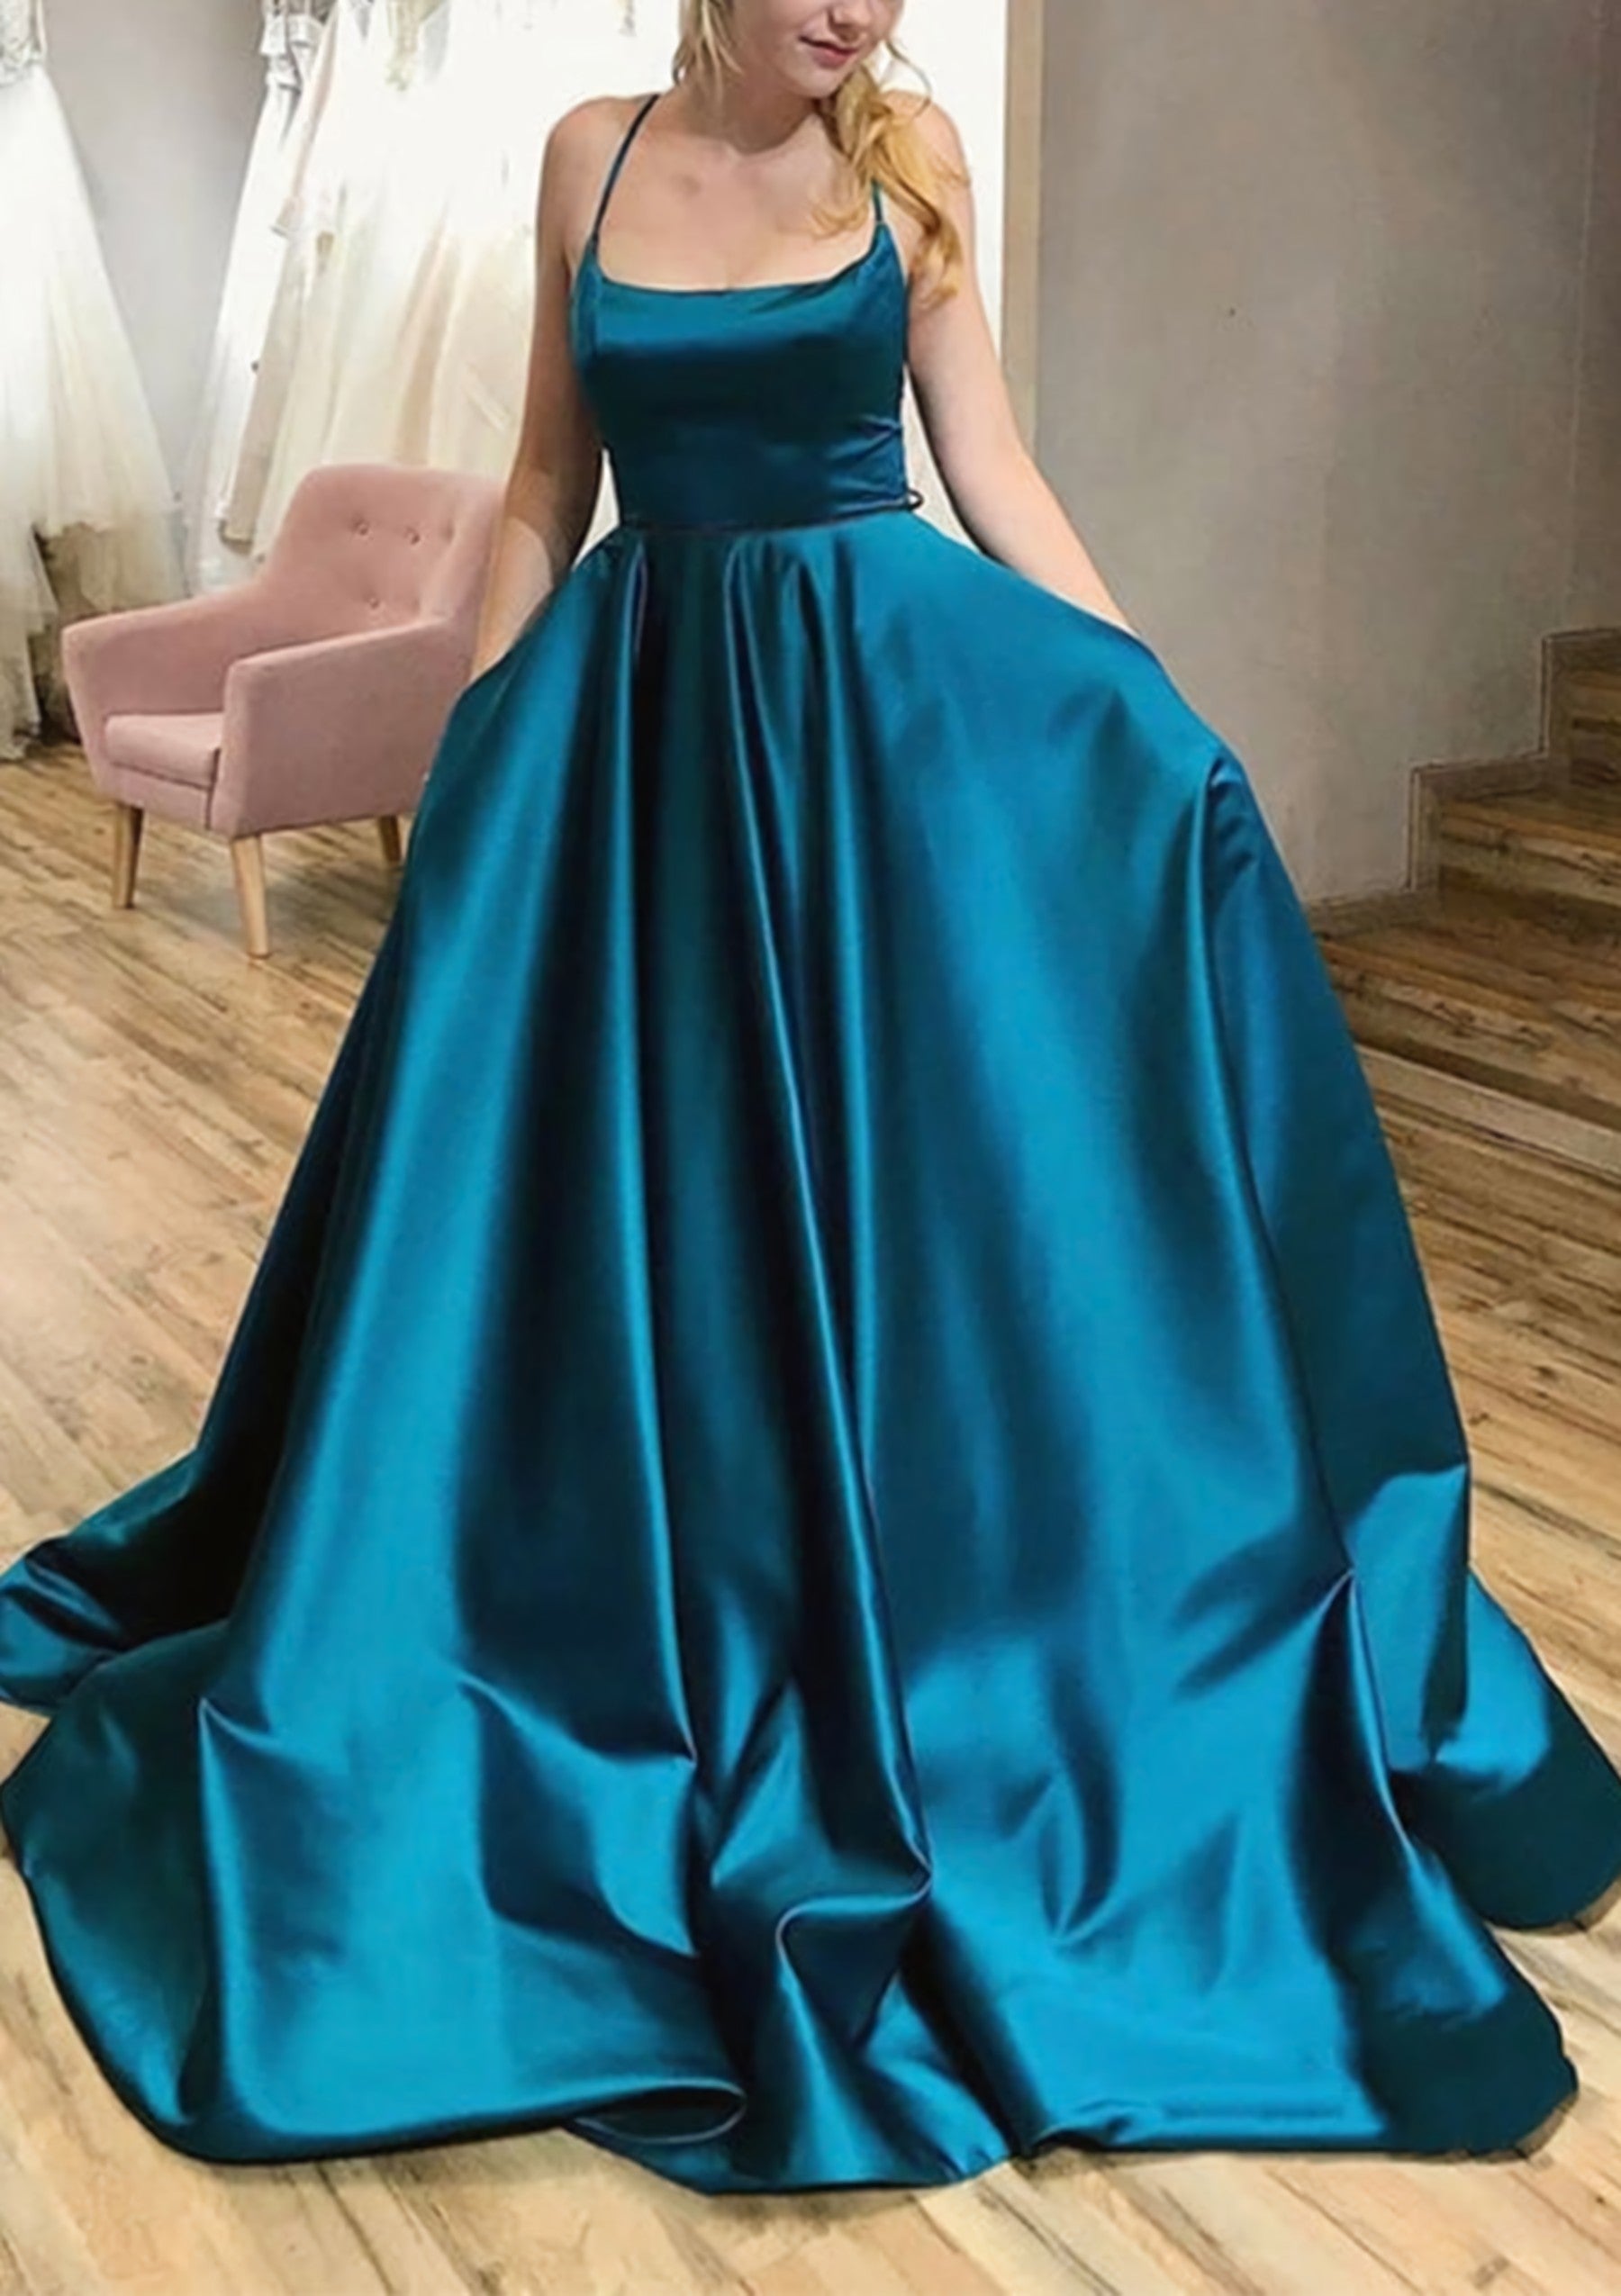 Formal Dress For Sale, Ball Gown A-line Square Neckline Spaghetti Straps Sweep Train Satin Prom Dress With Pleated Pockets